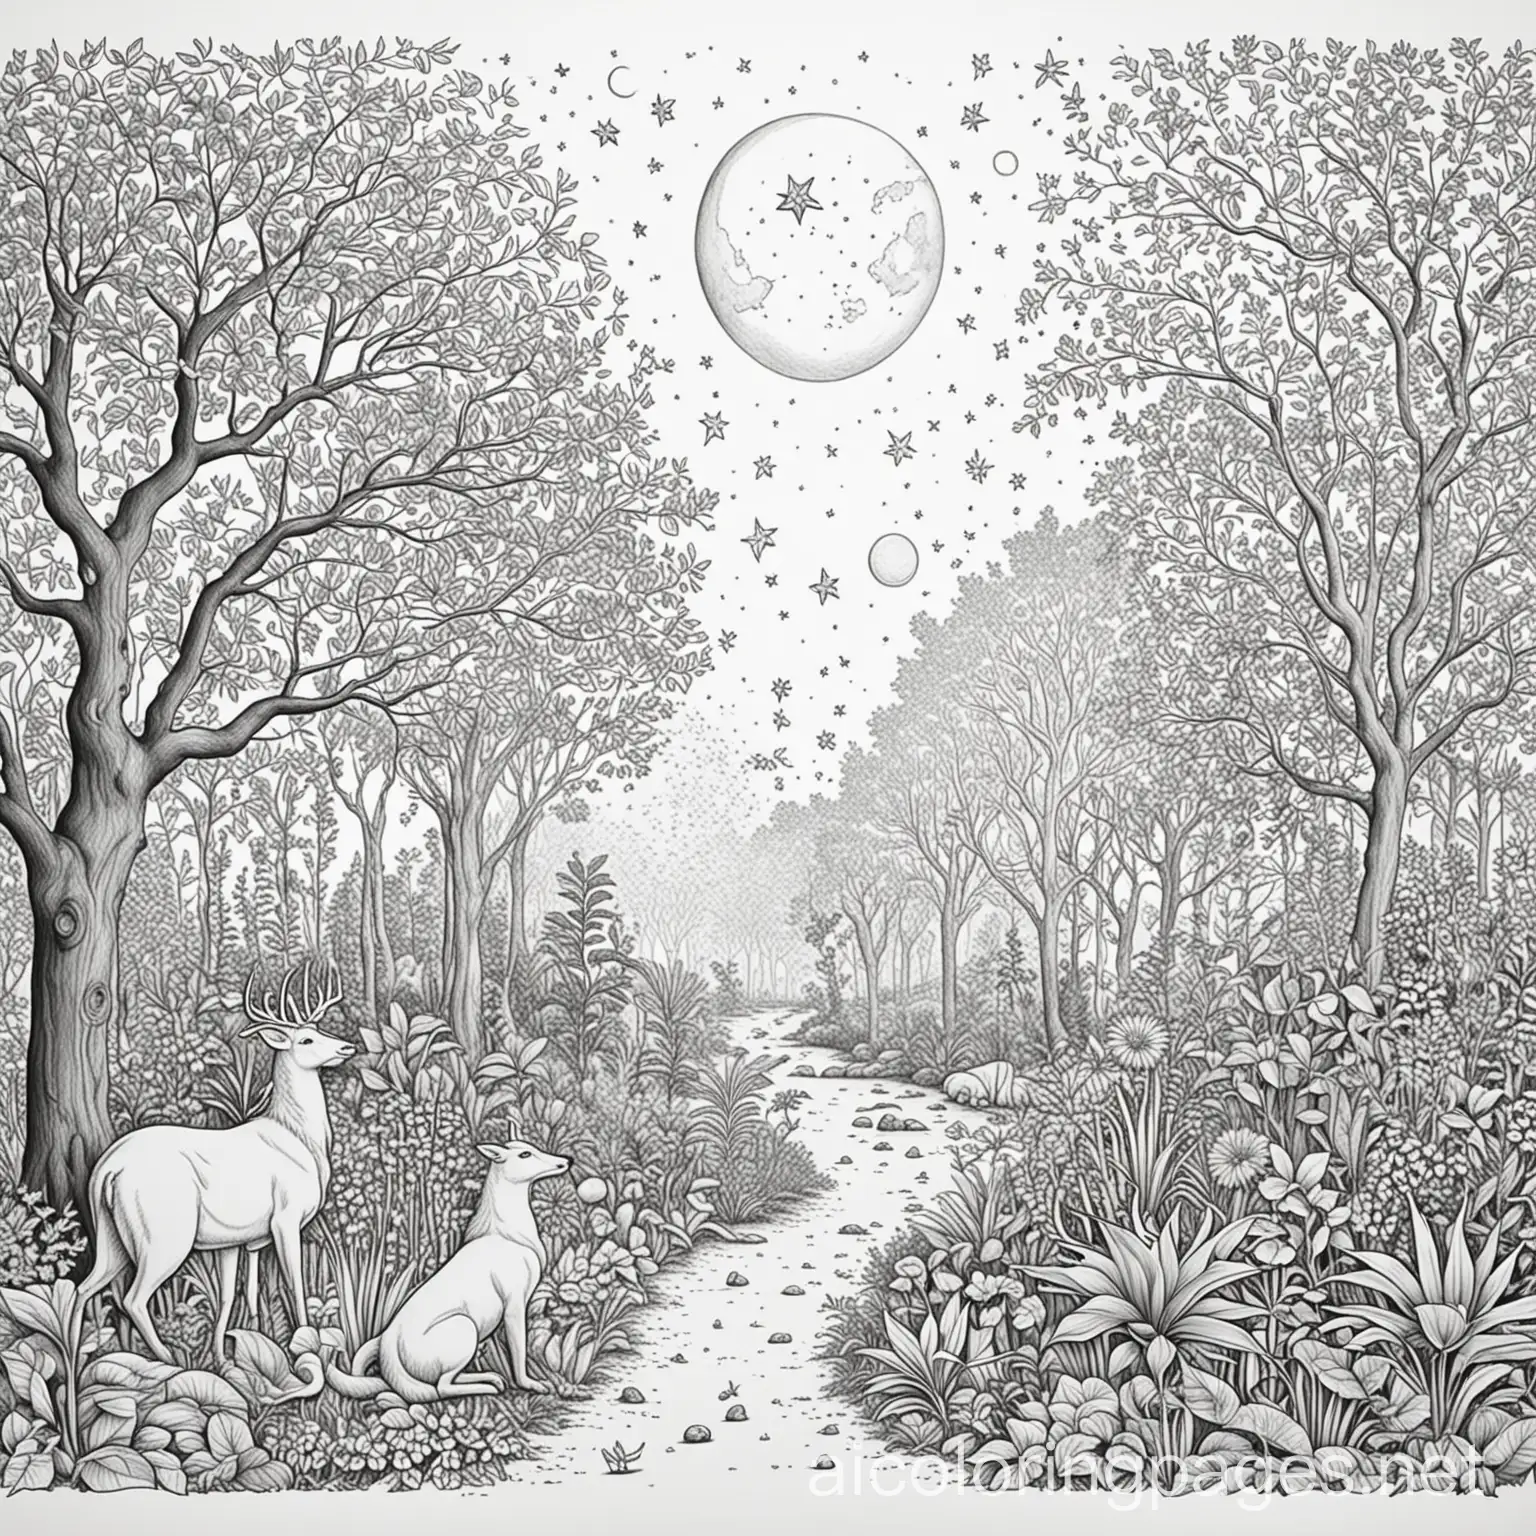 Illustration of the Earth, sun, moon, stars, animals, plants, and Adam and Eve in the Garden of Eden., Coloring Page, black and white, line art, white background, Simplicity, Ample White Space